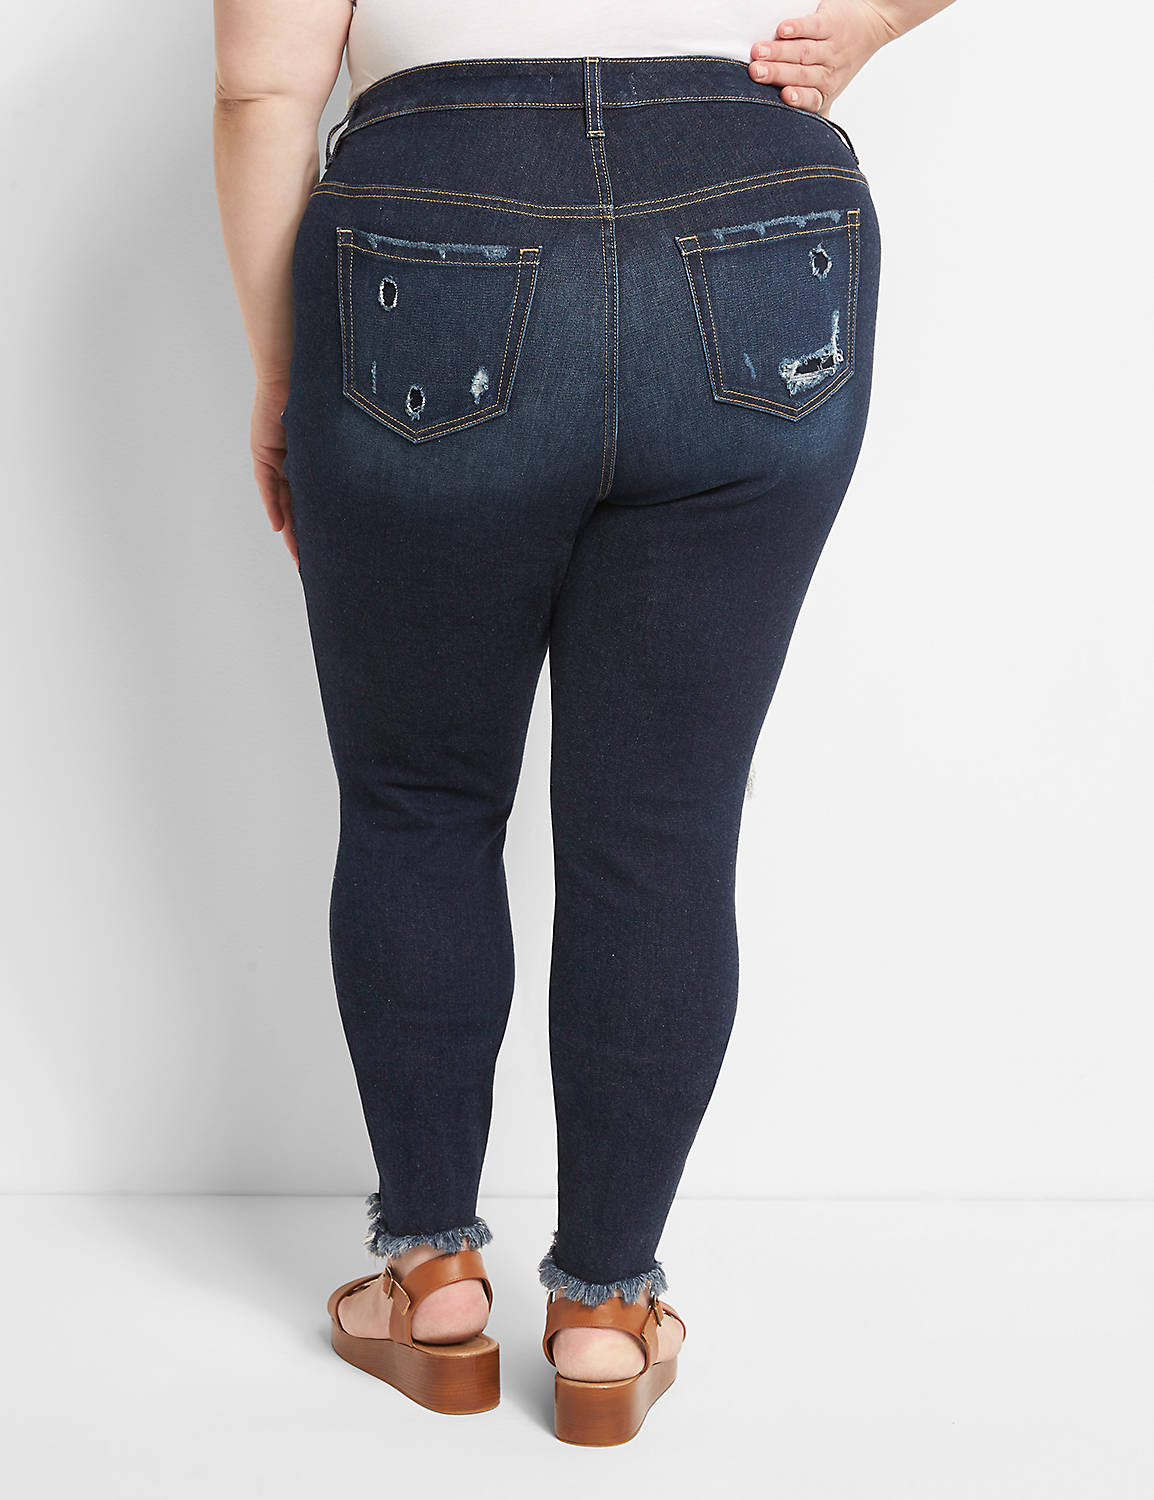 Straight Fit High-Rise Skinny Jean Product Image 2